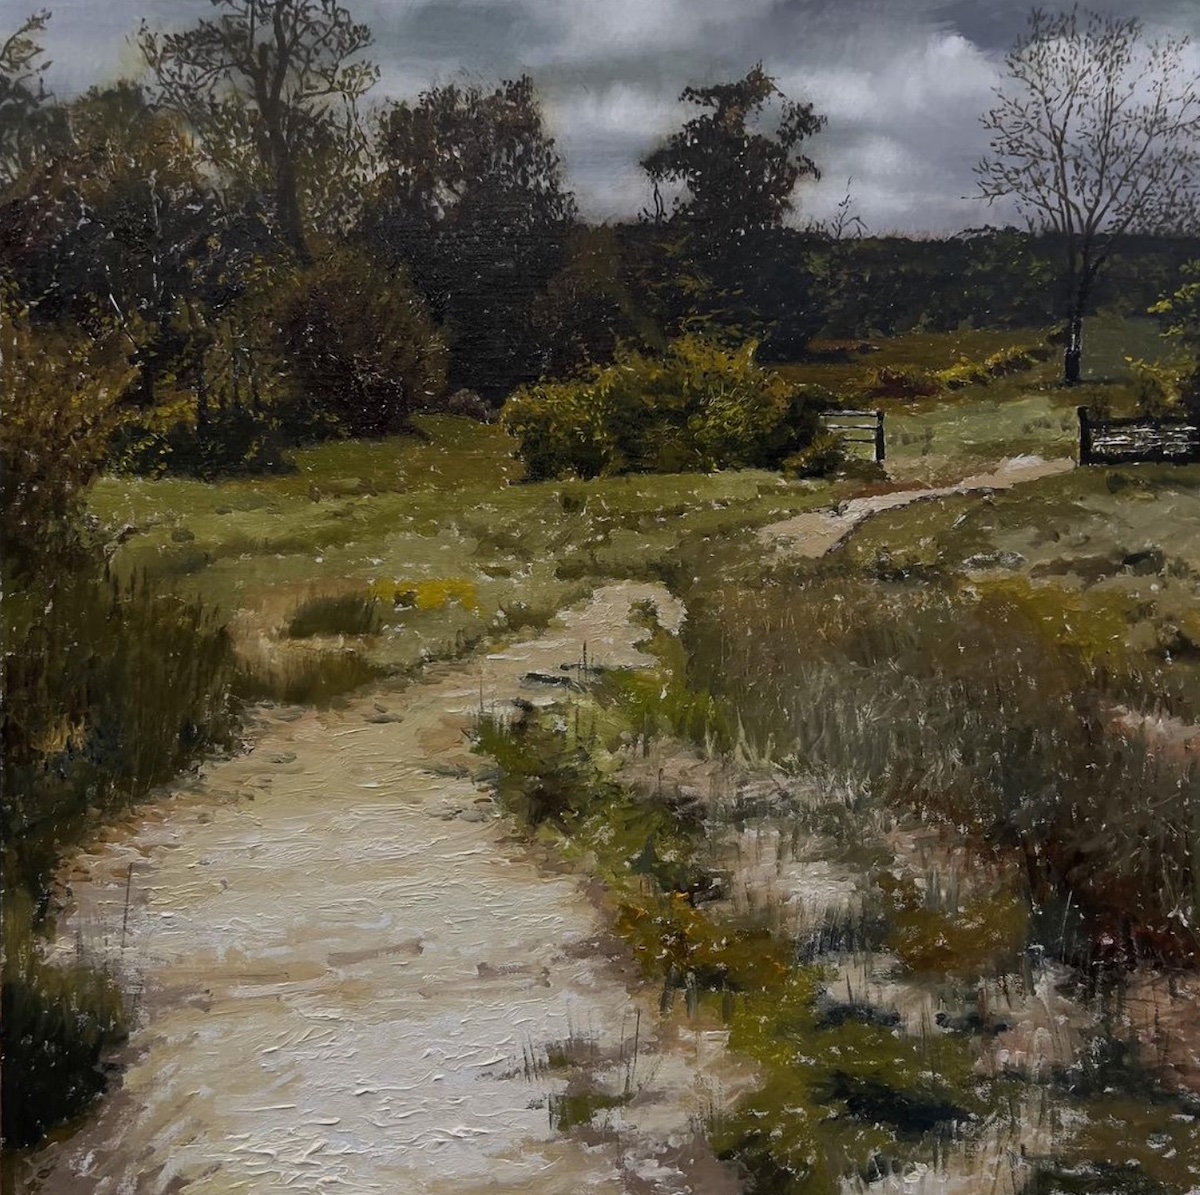 C.W. Mundy, “Down On The Farm,” Oil on linen, 20 x 20 in.